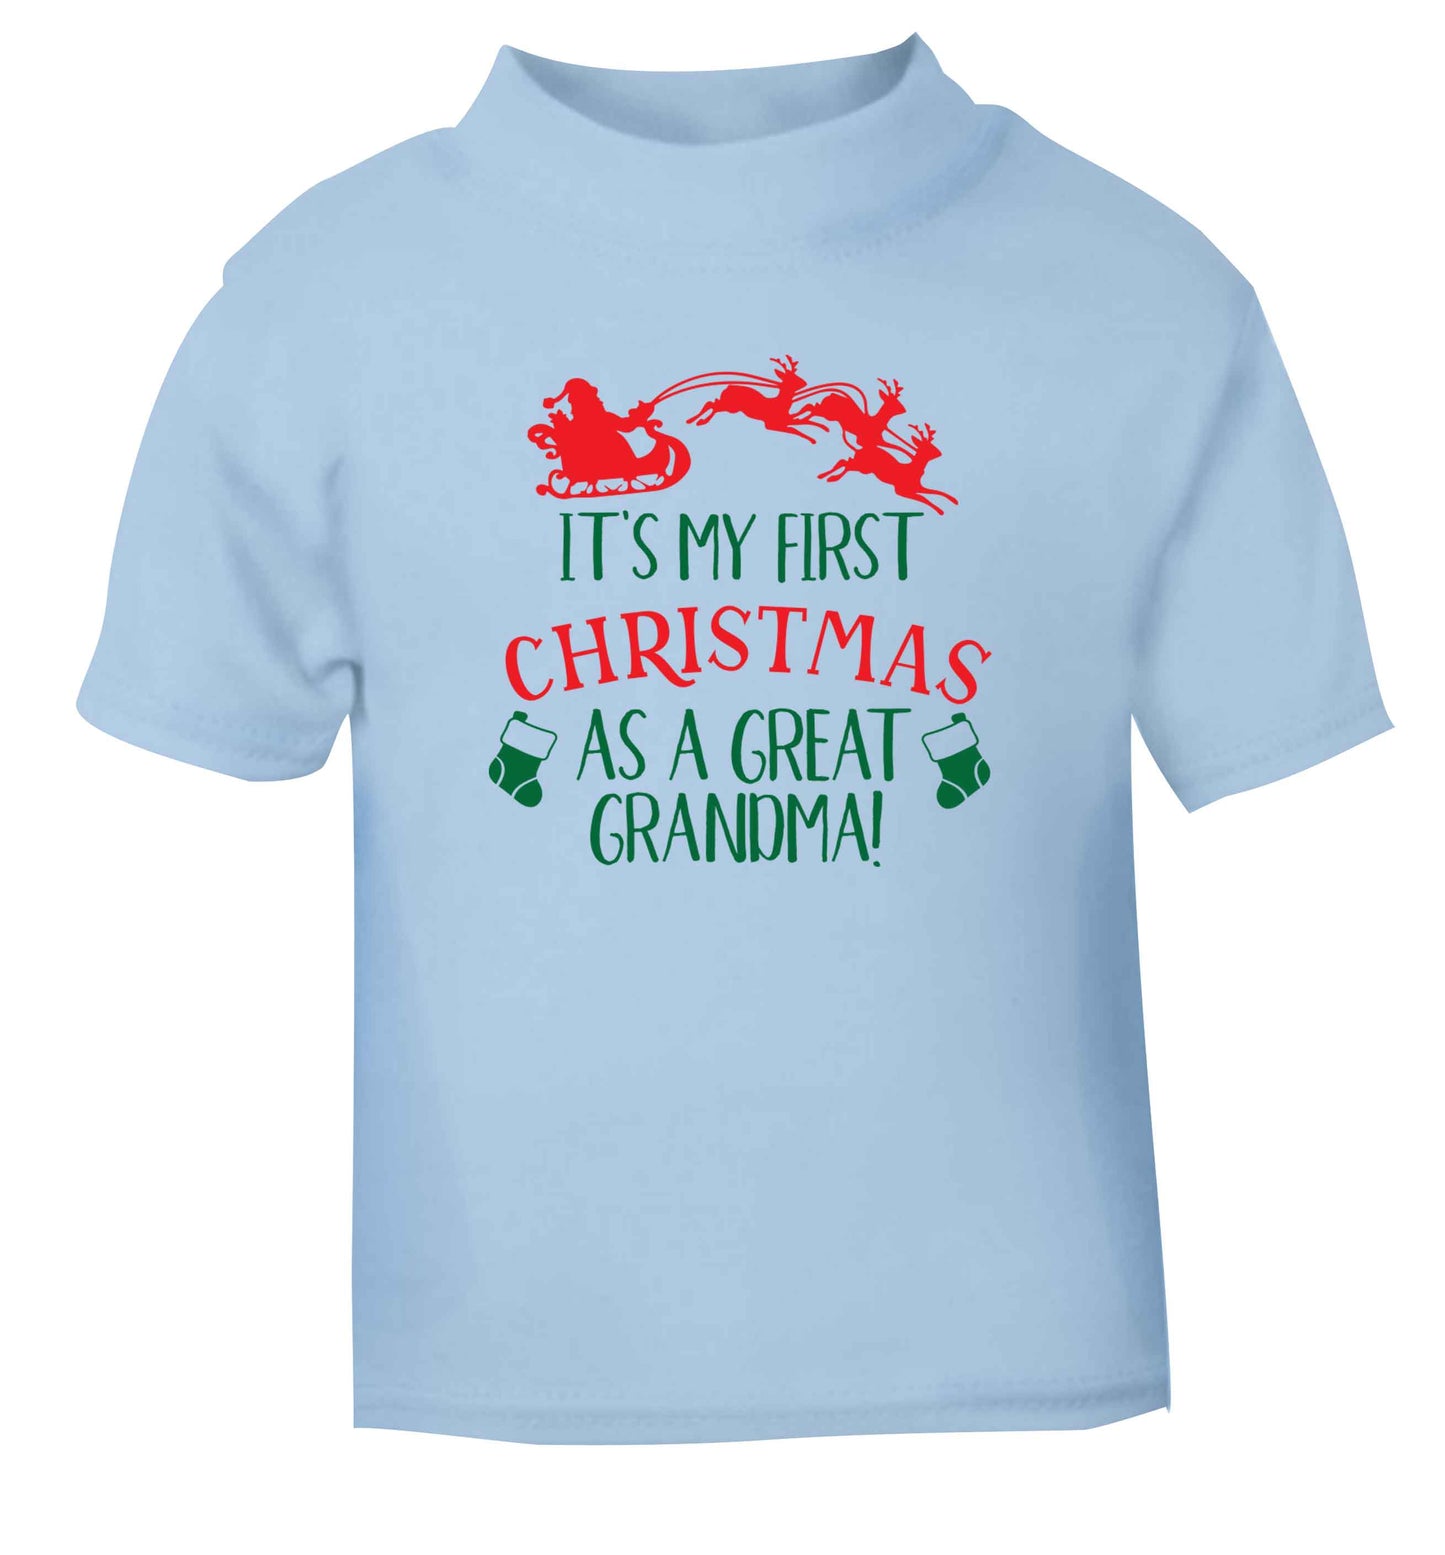 It's my first Christmas as a great grandma! light blue Baby Toddler Tshirt 2 Years